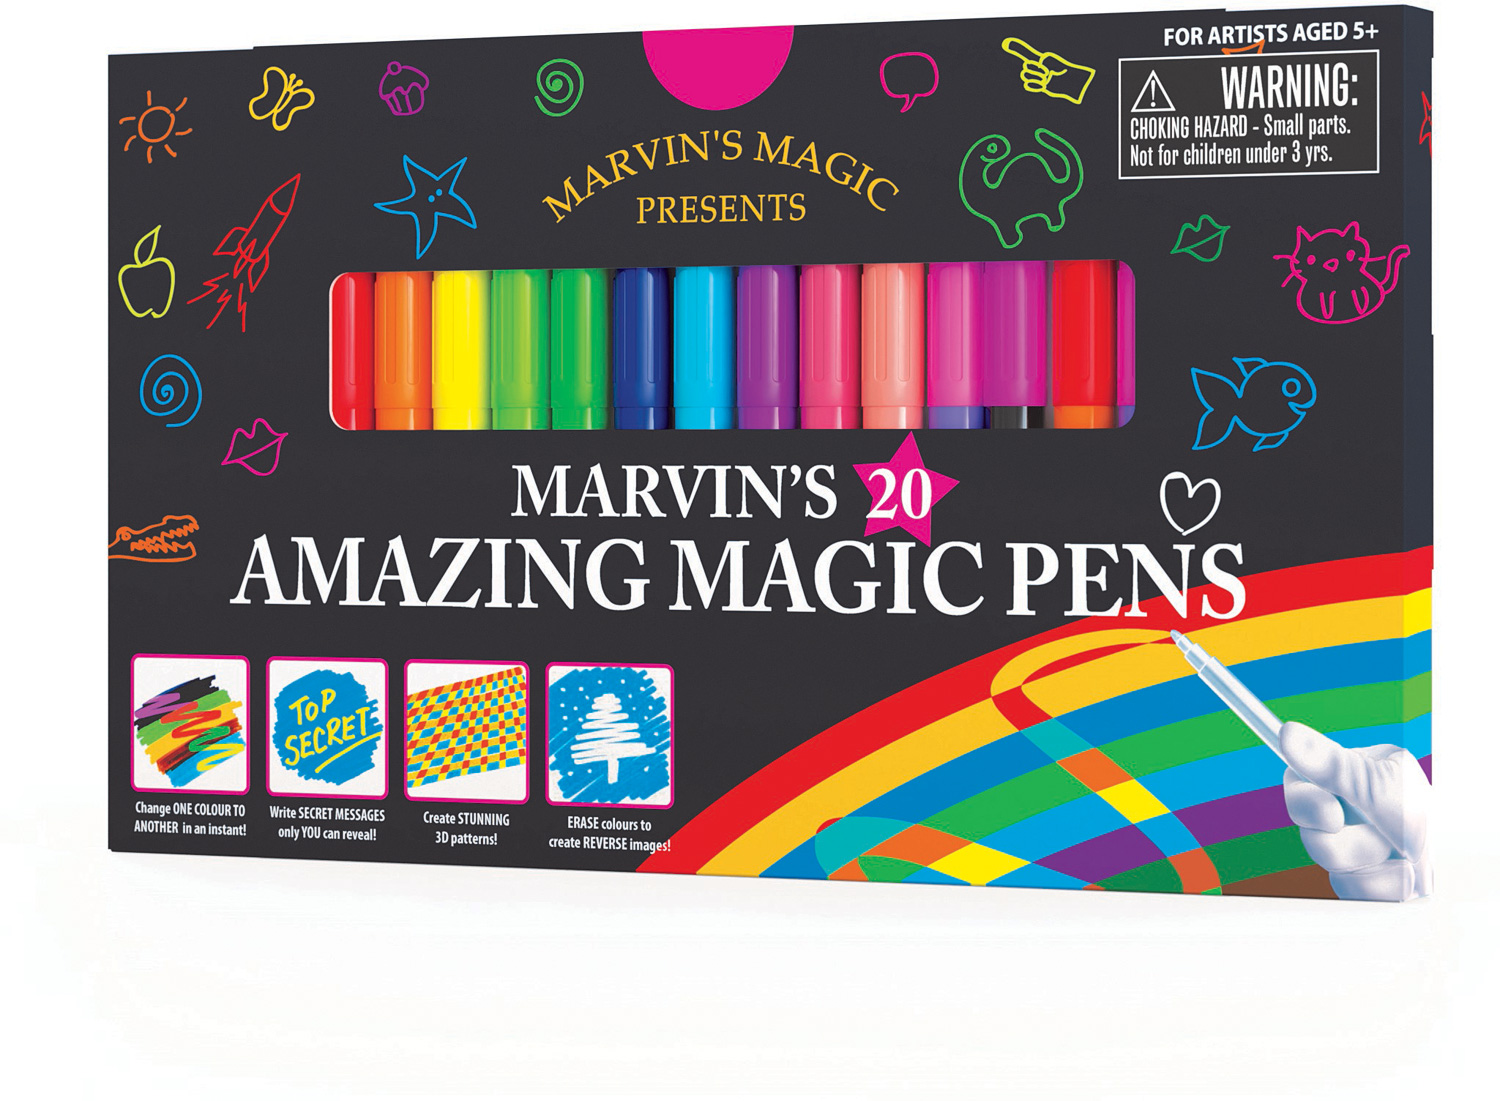 Marvin's Amazing Magic Pens – Awesome Toys Gifts